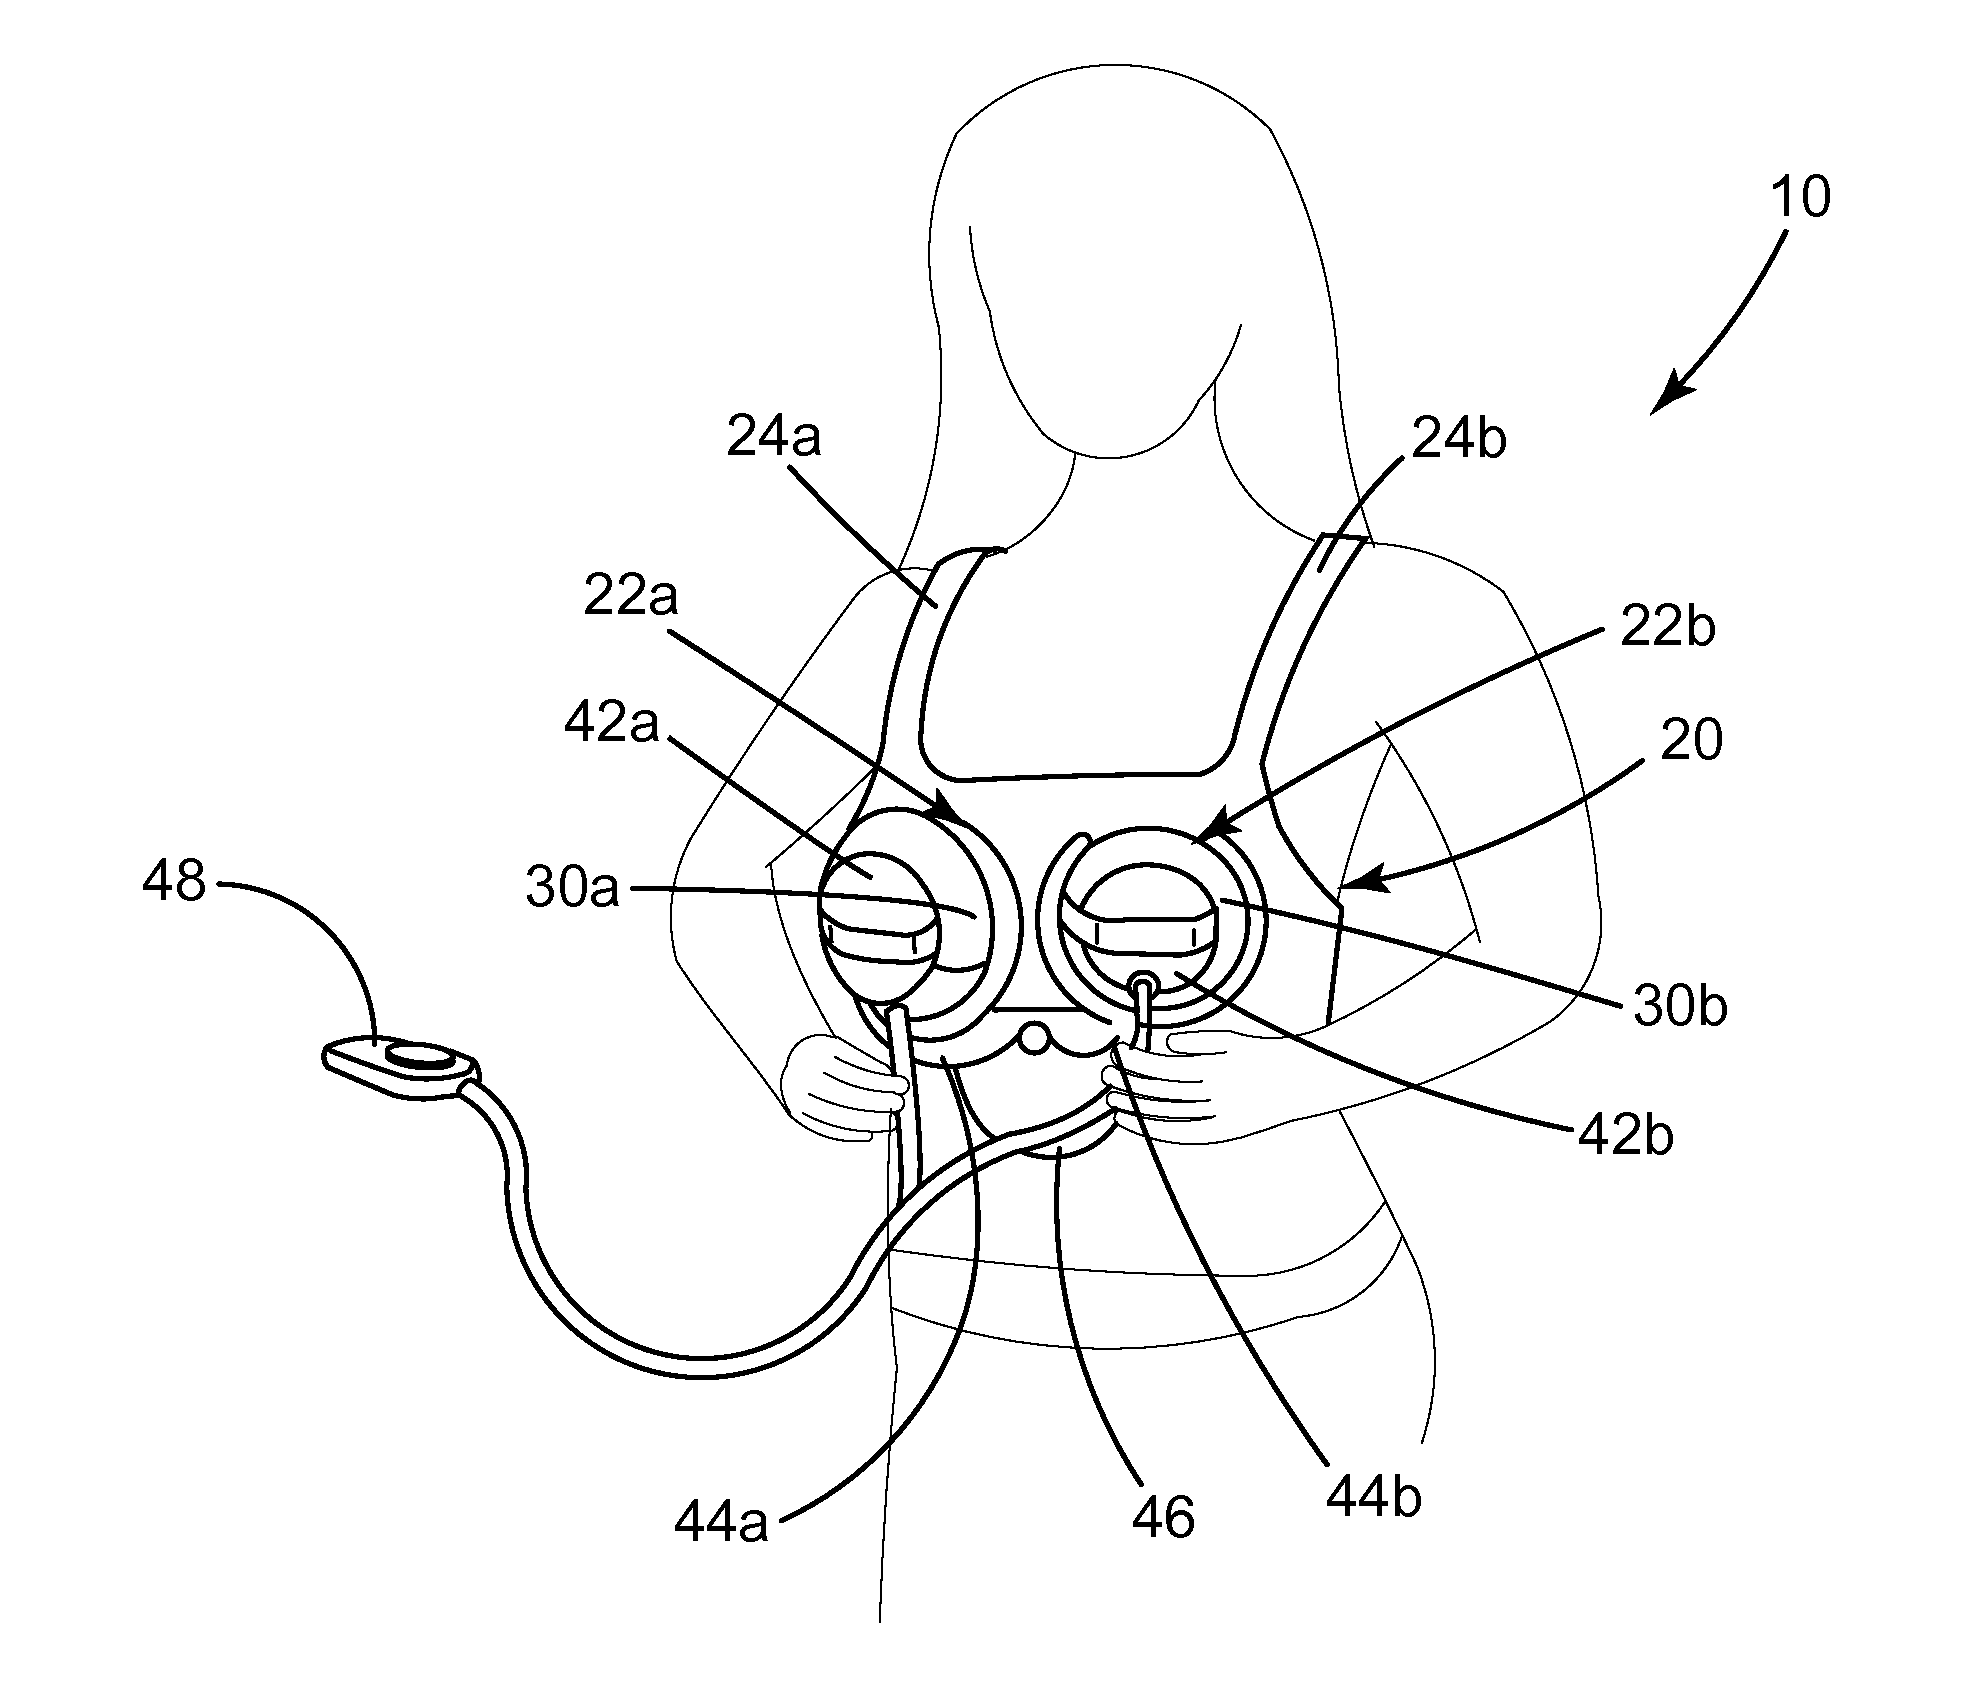 Apparatus and methods for compressing a woman's breast to express milk in a concealable manner